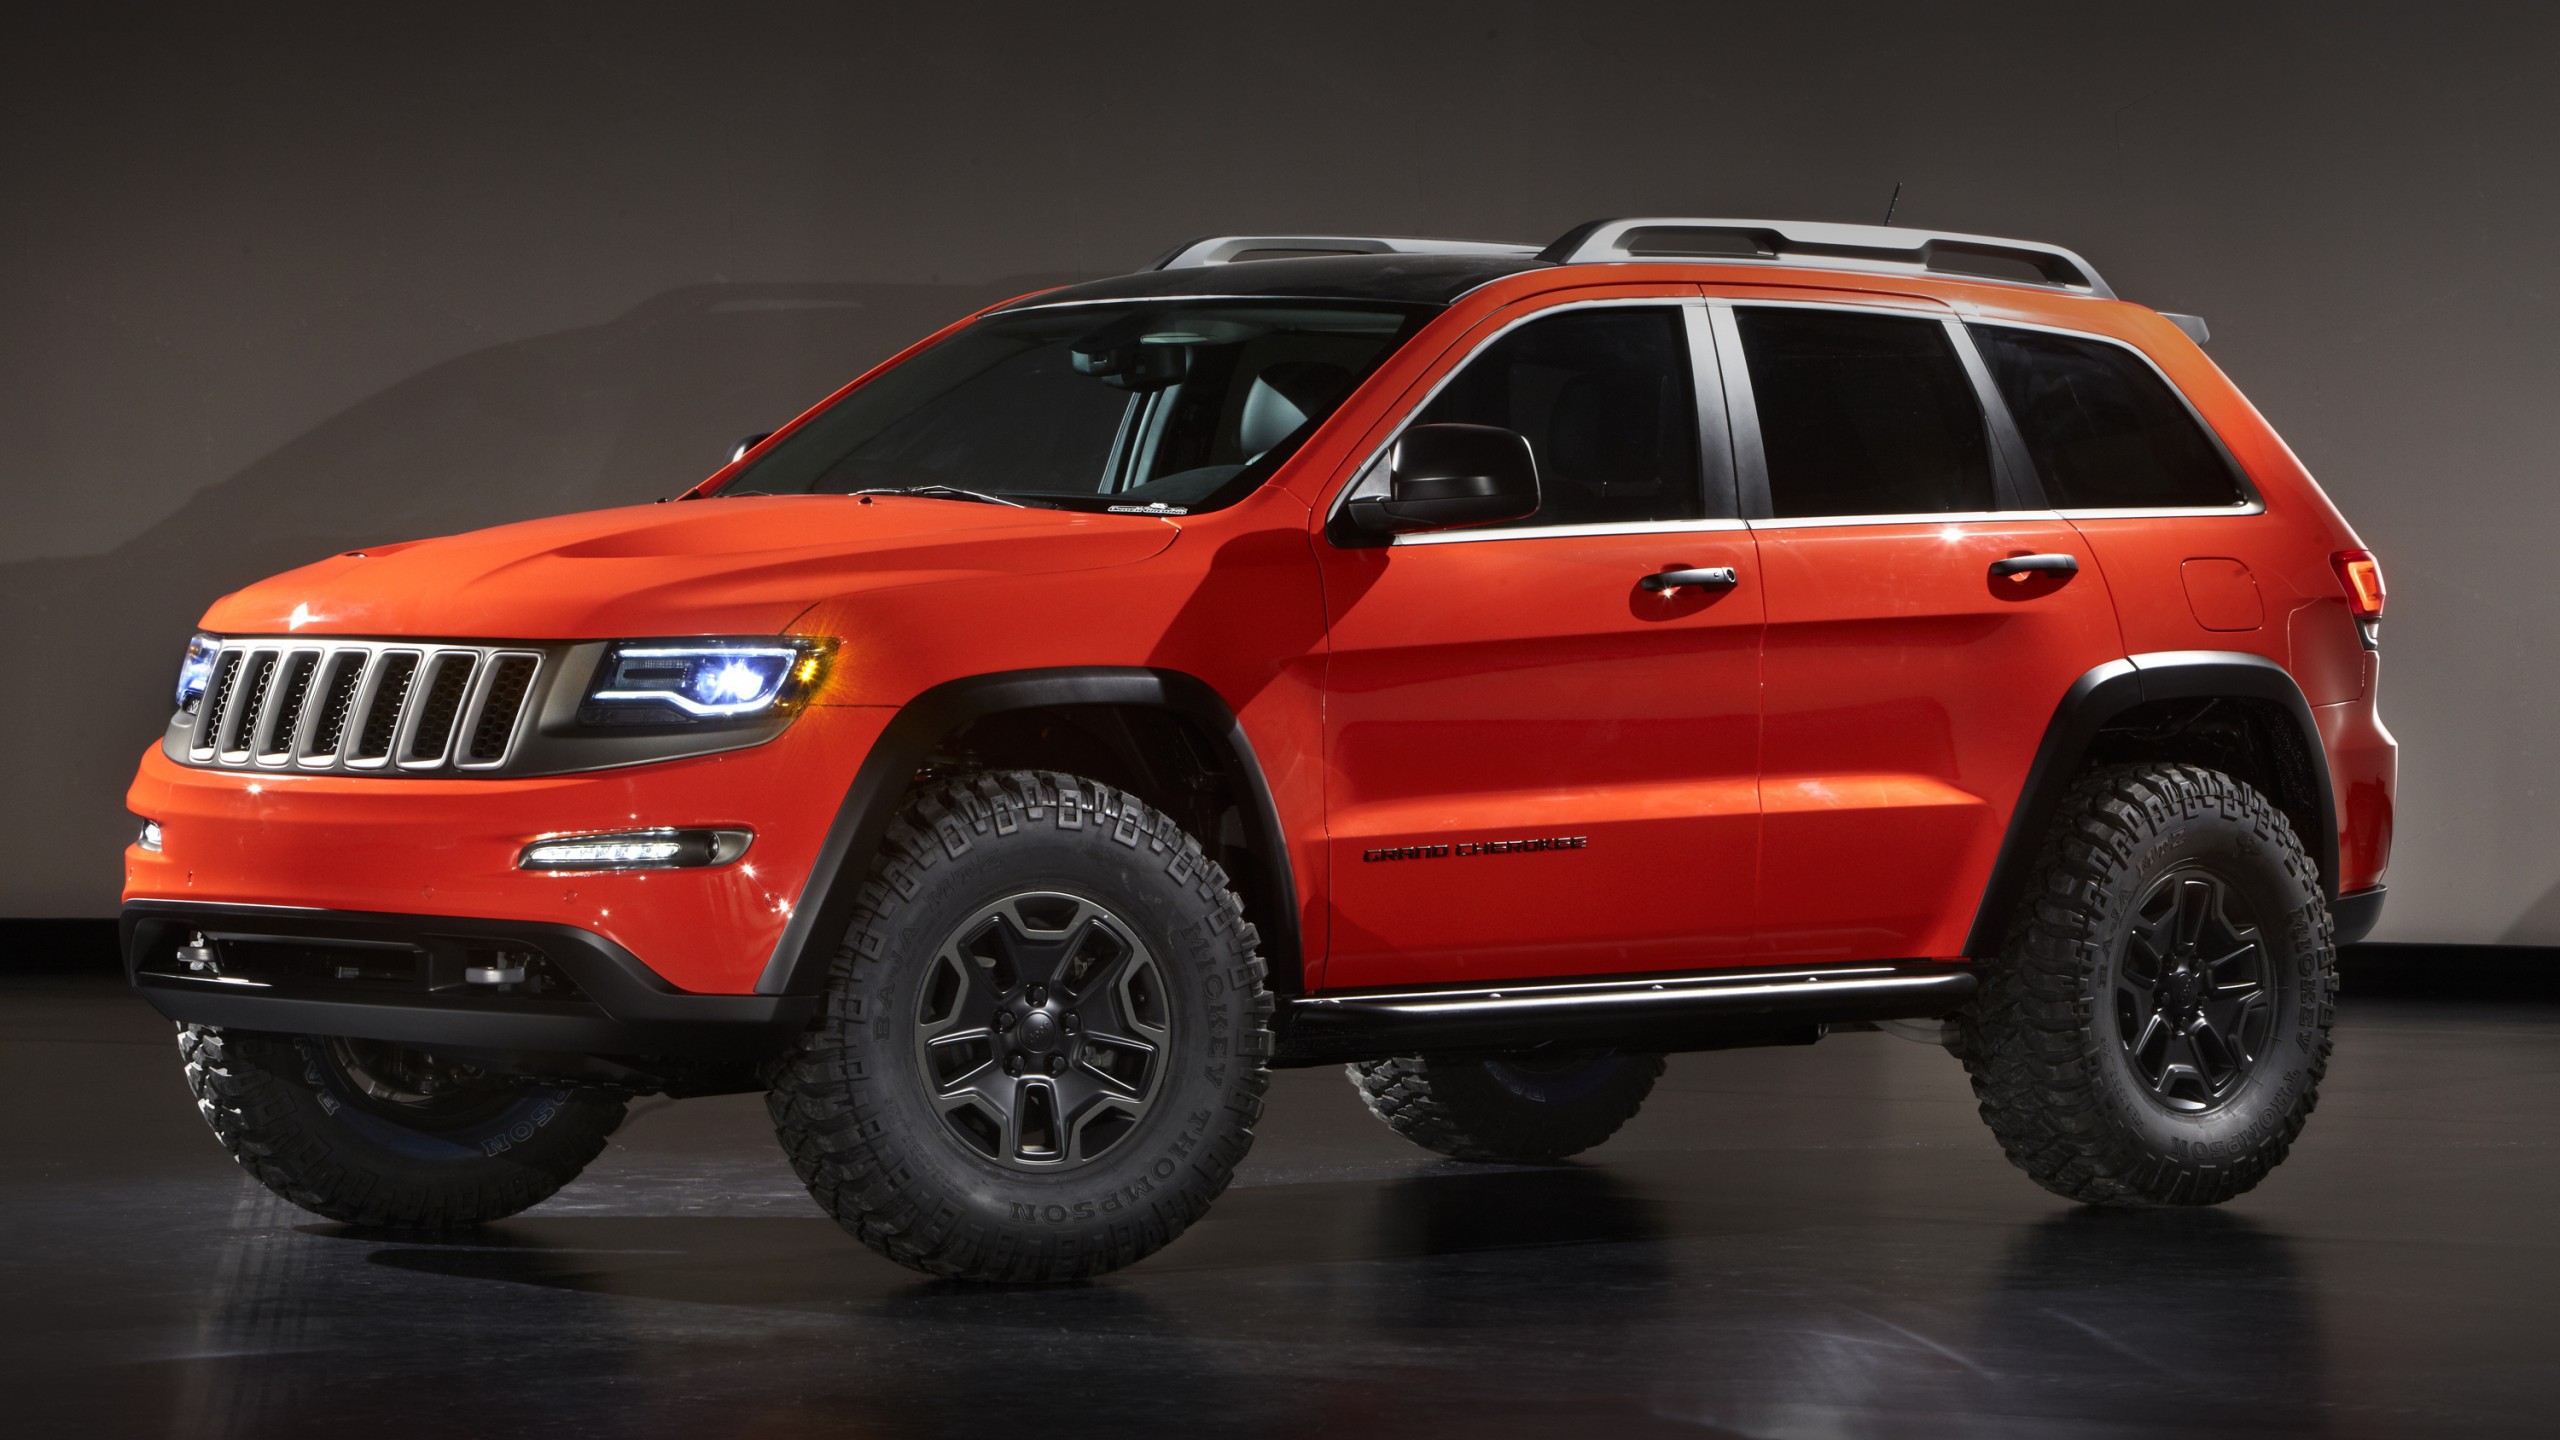 Jeep Grand Cherokee Wallpapers Images Photos Pictures Backgrounds 2004 Jeep Grand Cherokee 4.0 Towing Capacity